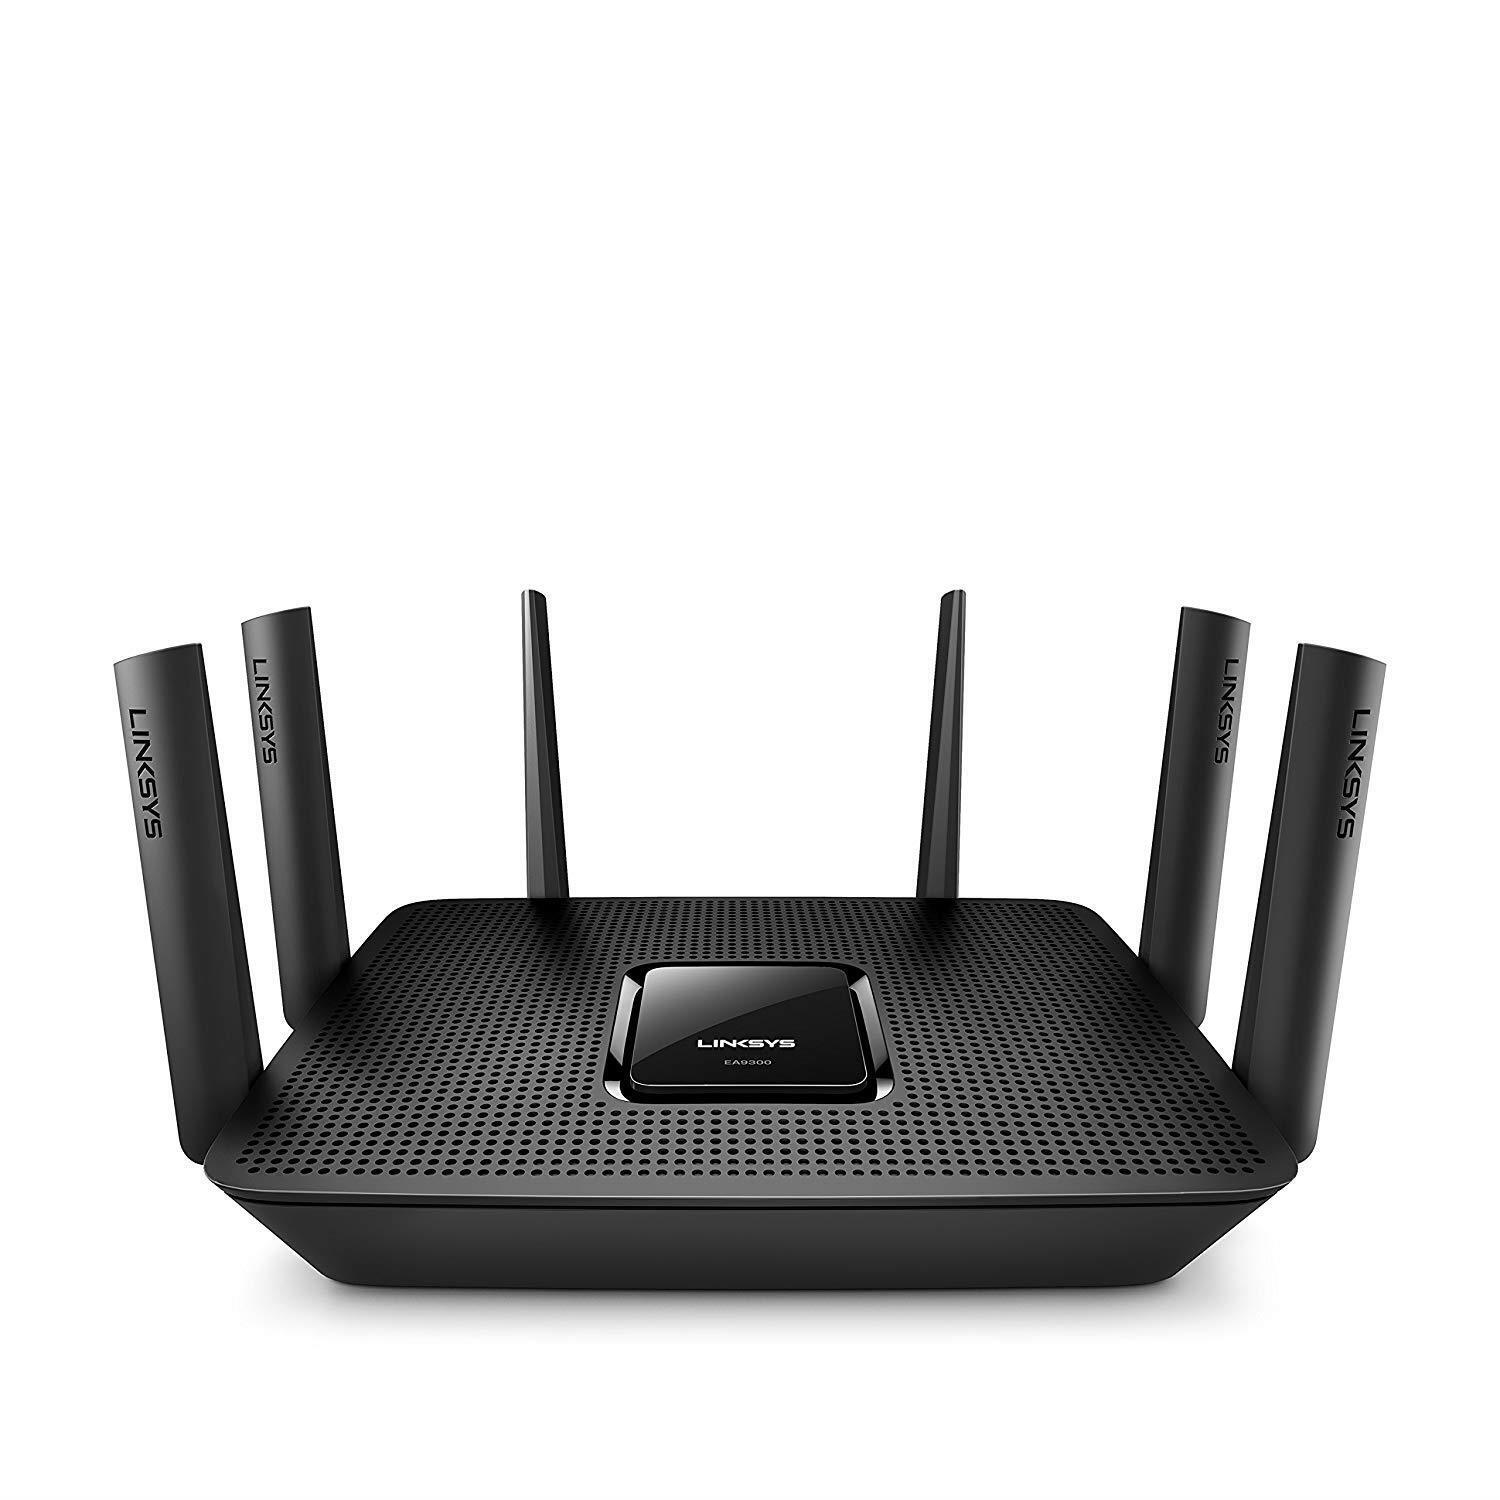 Defective Linksys EA9300 AC4000 Wireless Router - As IS